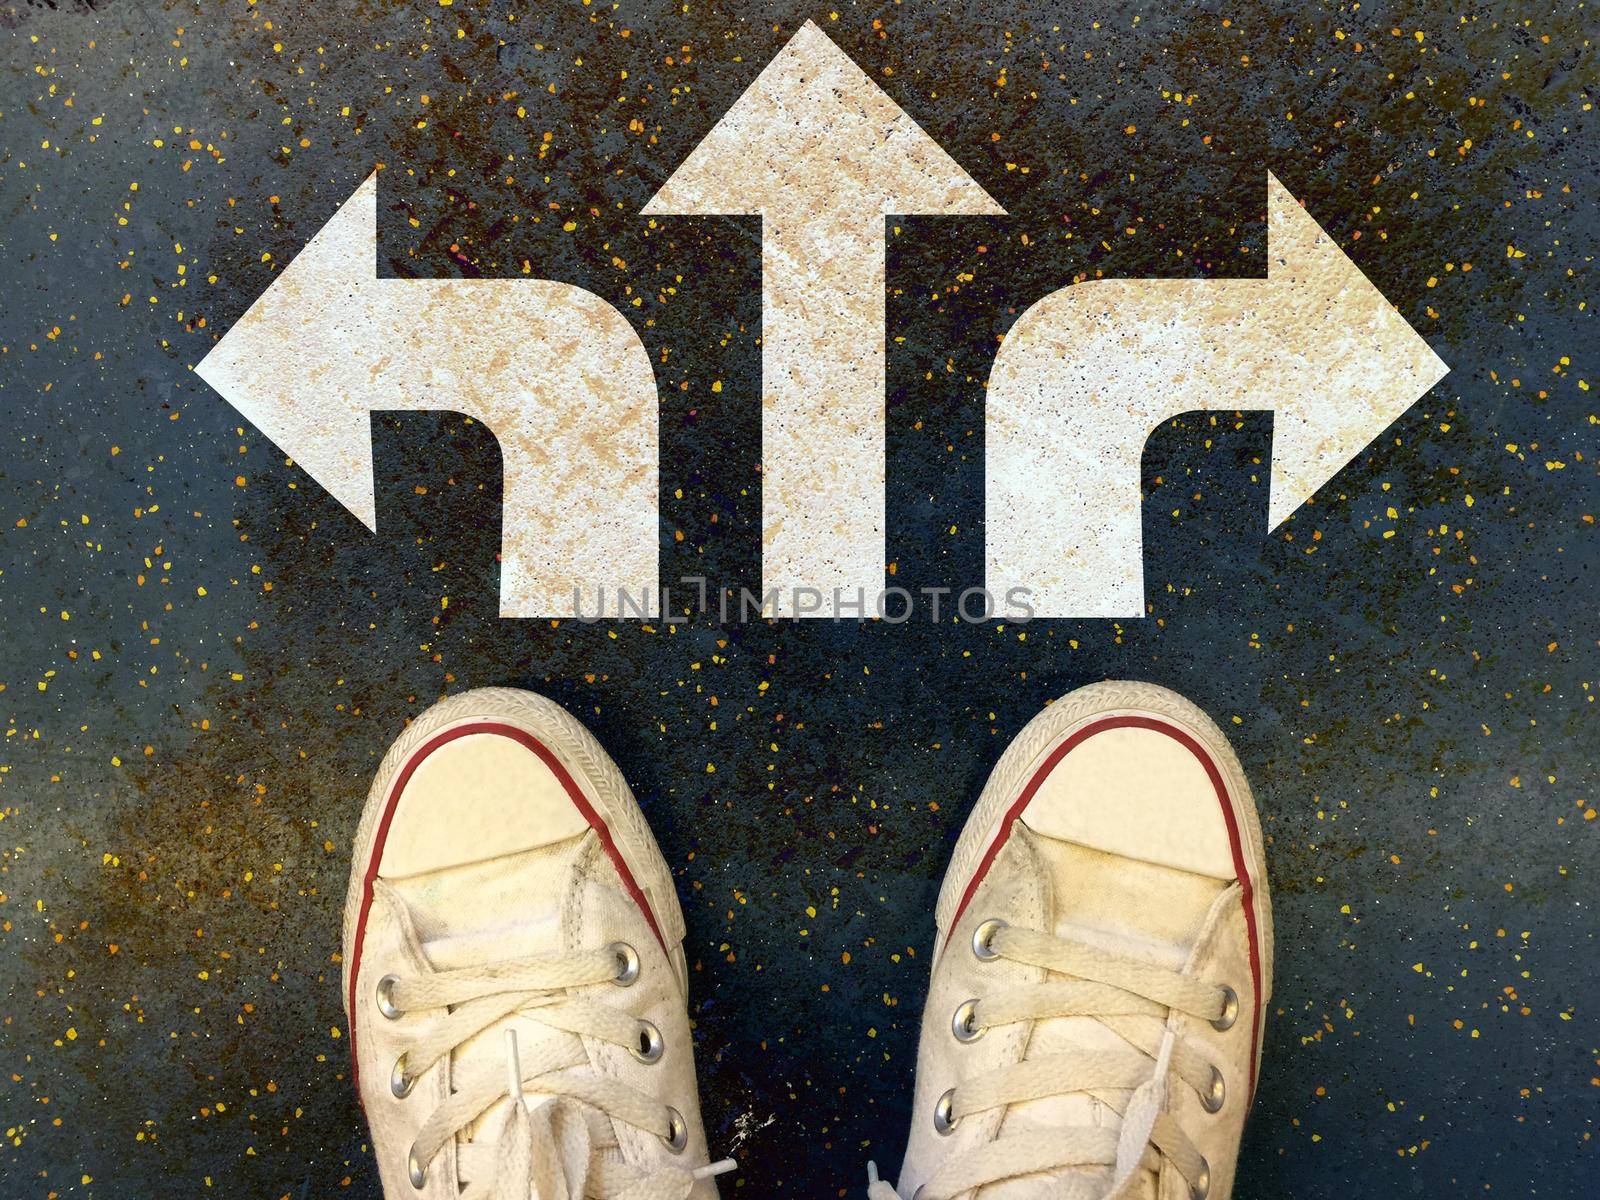 Sneakers shoes with three white arrows print pointing on grunge road , making decision business concept